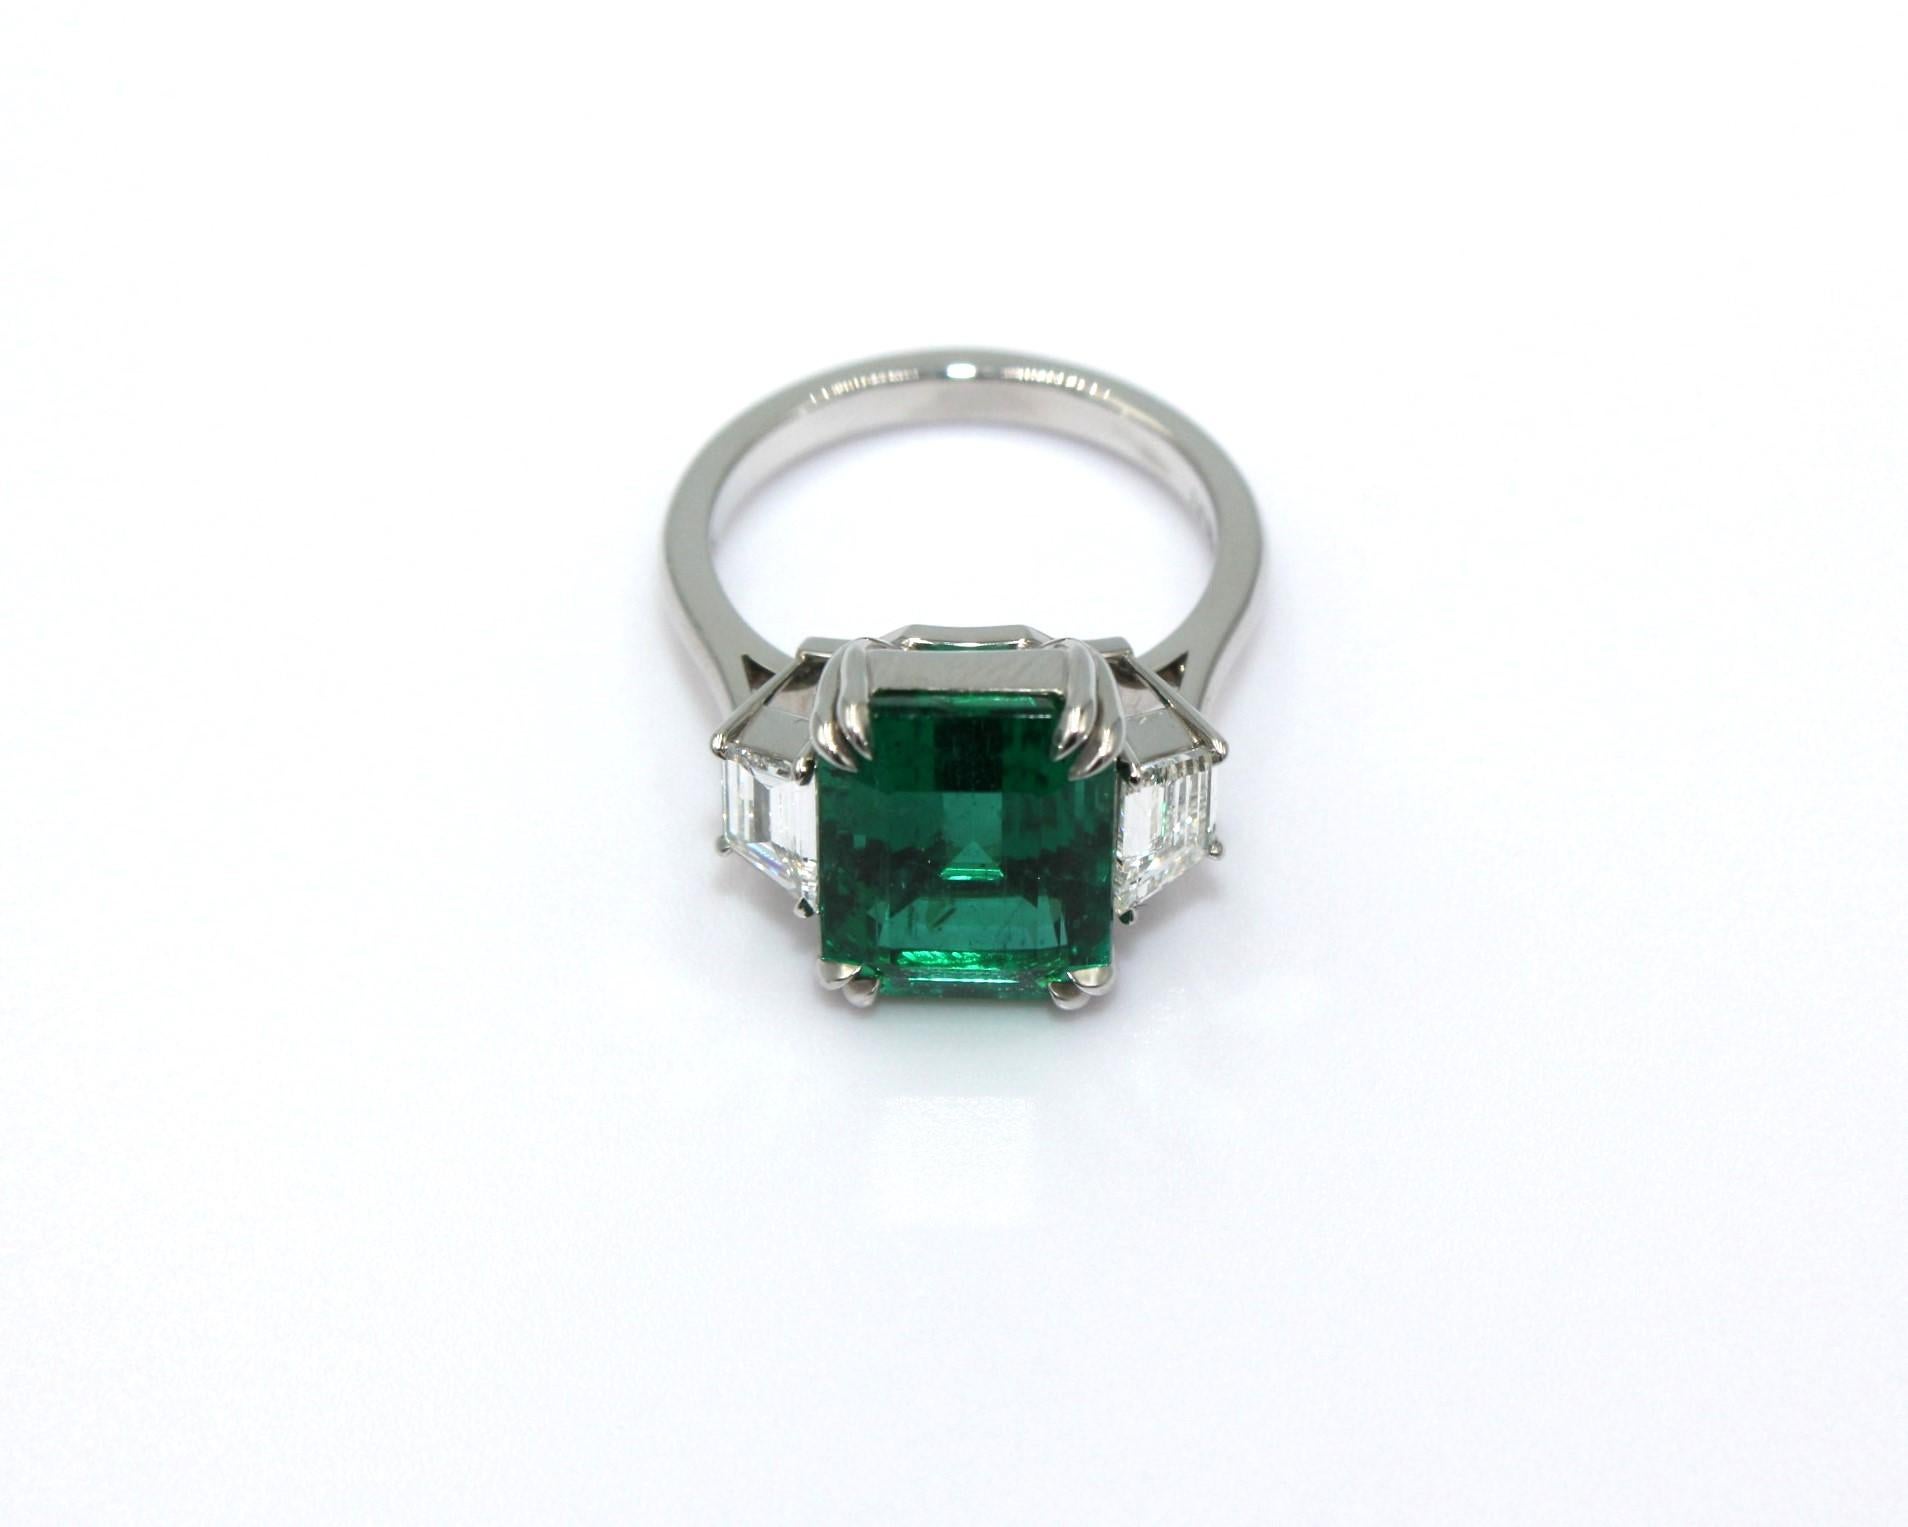 Three-stone ring of 6.09 carat emerald-cut Zambian Emerald with 2 trapezoid shaped diamonds, totaling a diamond weight of 0.70 carat. 

This stunning Emerald Diamond Ring will highlight your uniqueness and elegance. 

Item Details:
- Type: Ring
-